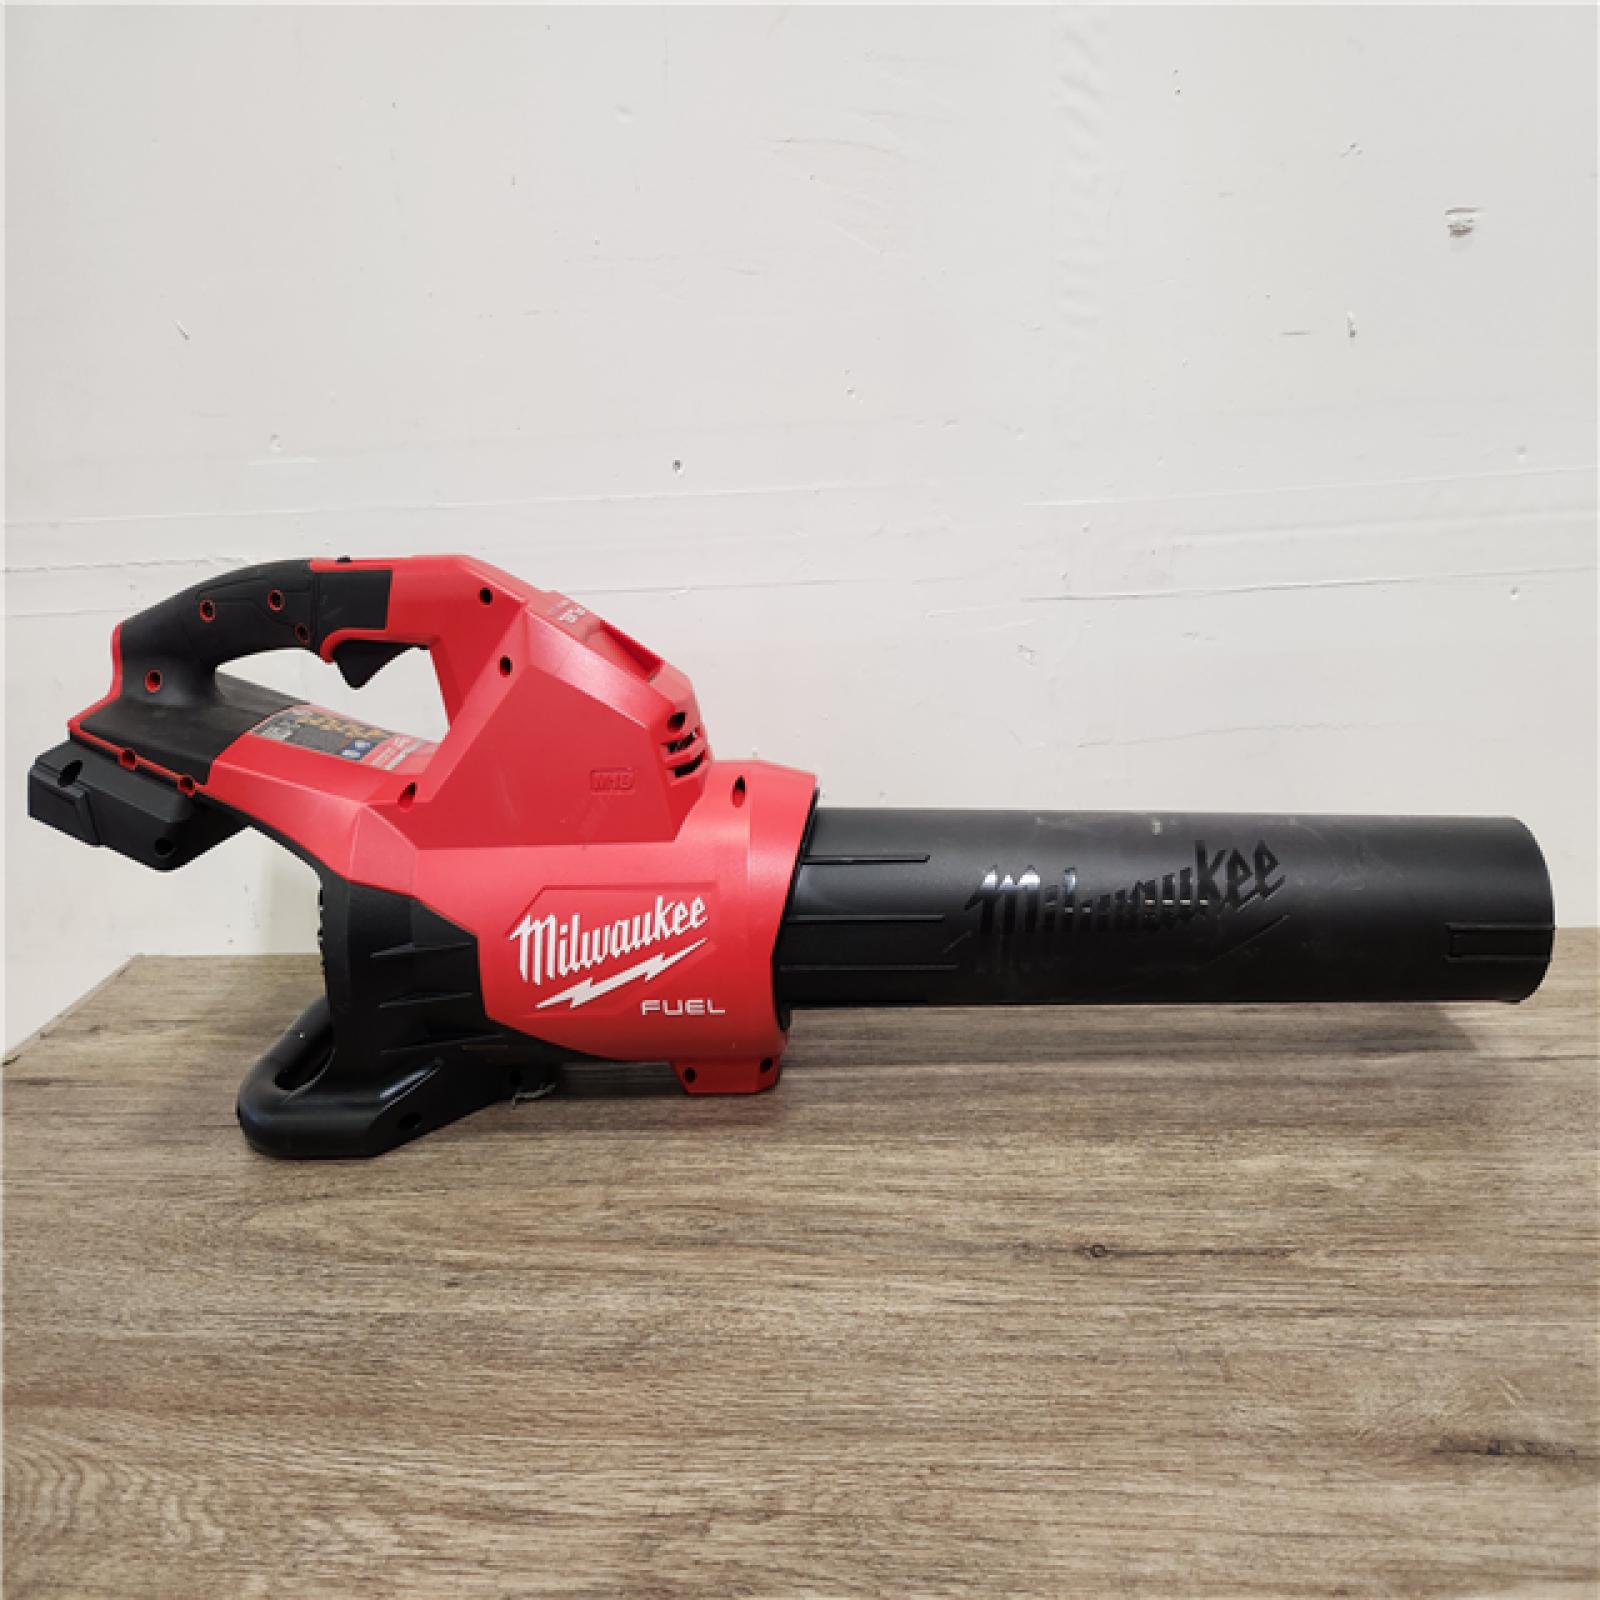 Phoenix Location NEW Milwaukee M18 FUEL Dual Battery 145 MPH 600 CFM 18V Lithium-Ion Brushless Cordless Handheld Blower (Tool-Only)